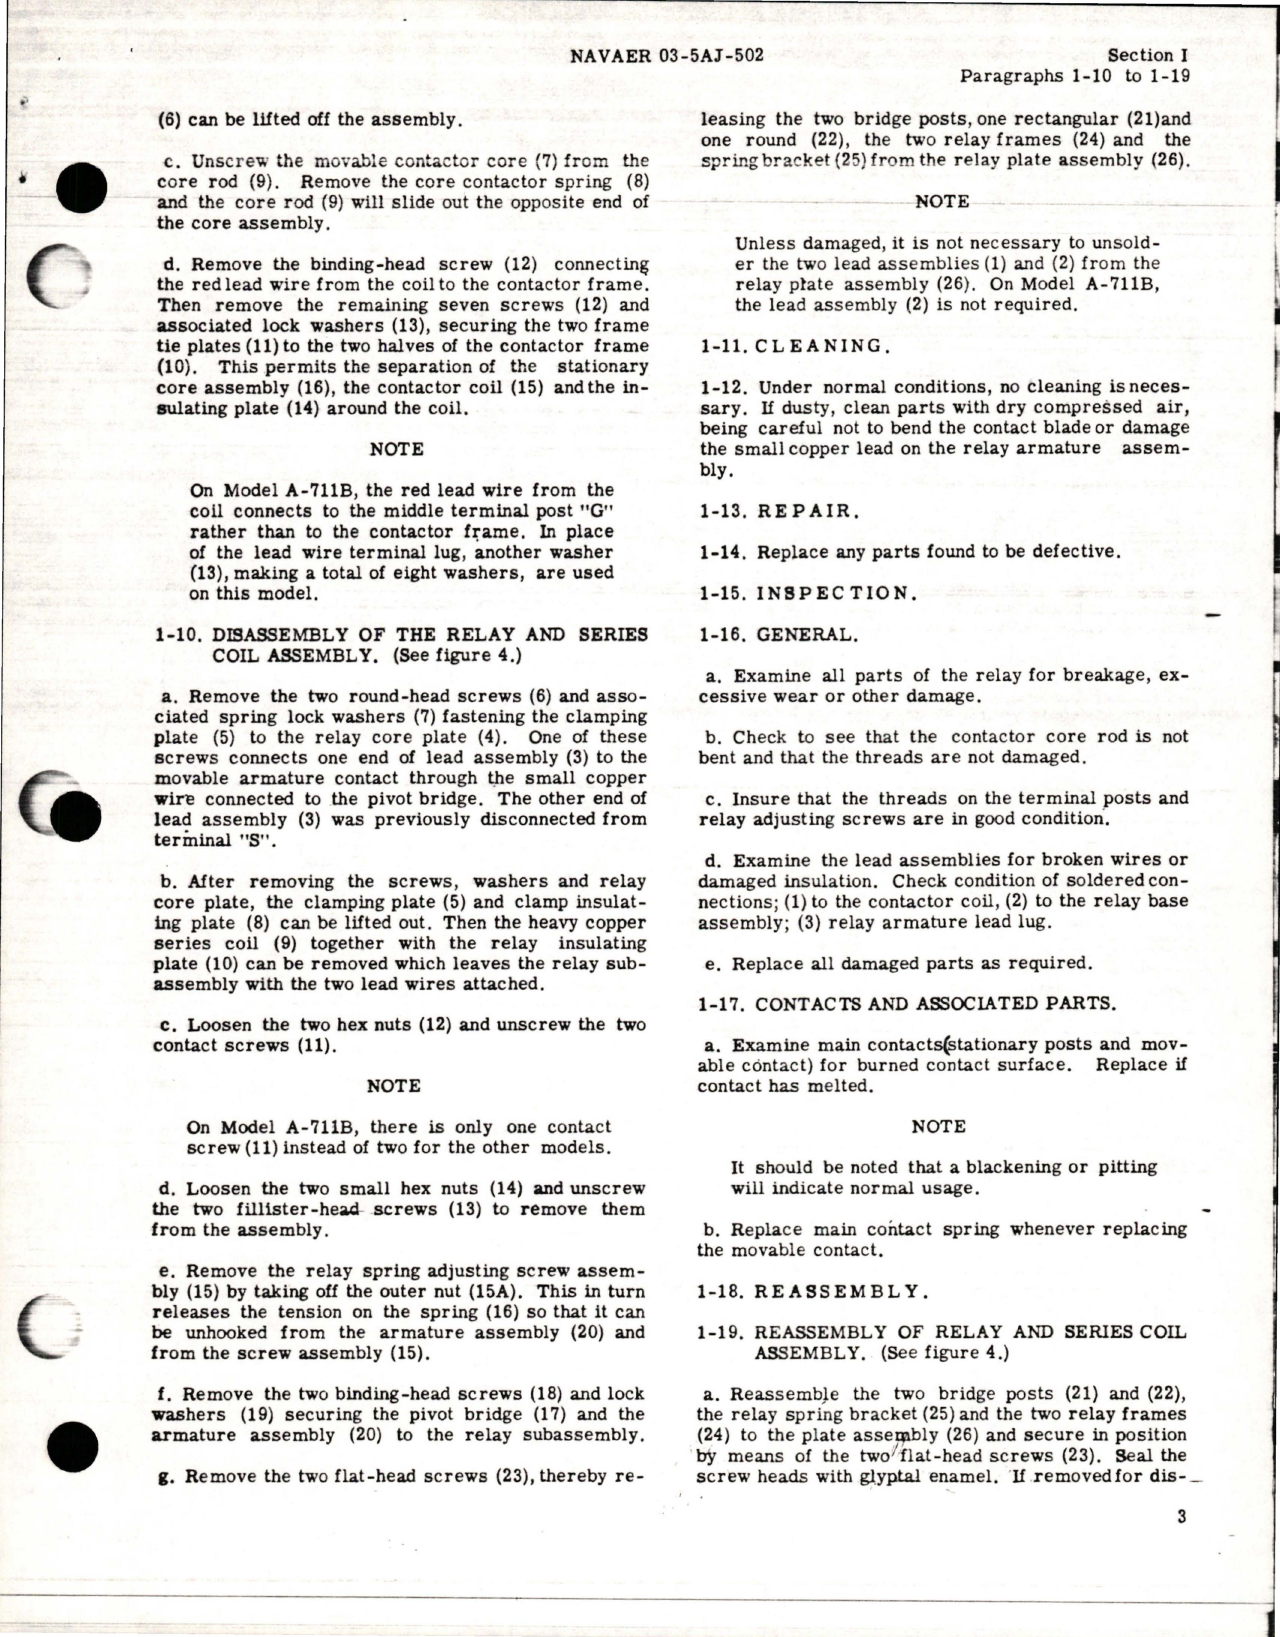 Sample page 5 from AirCorps Library document: Overhaul Instructions with Parts for Starter Relays - Models A-711B, A-711C and A-711E